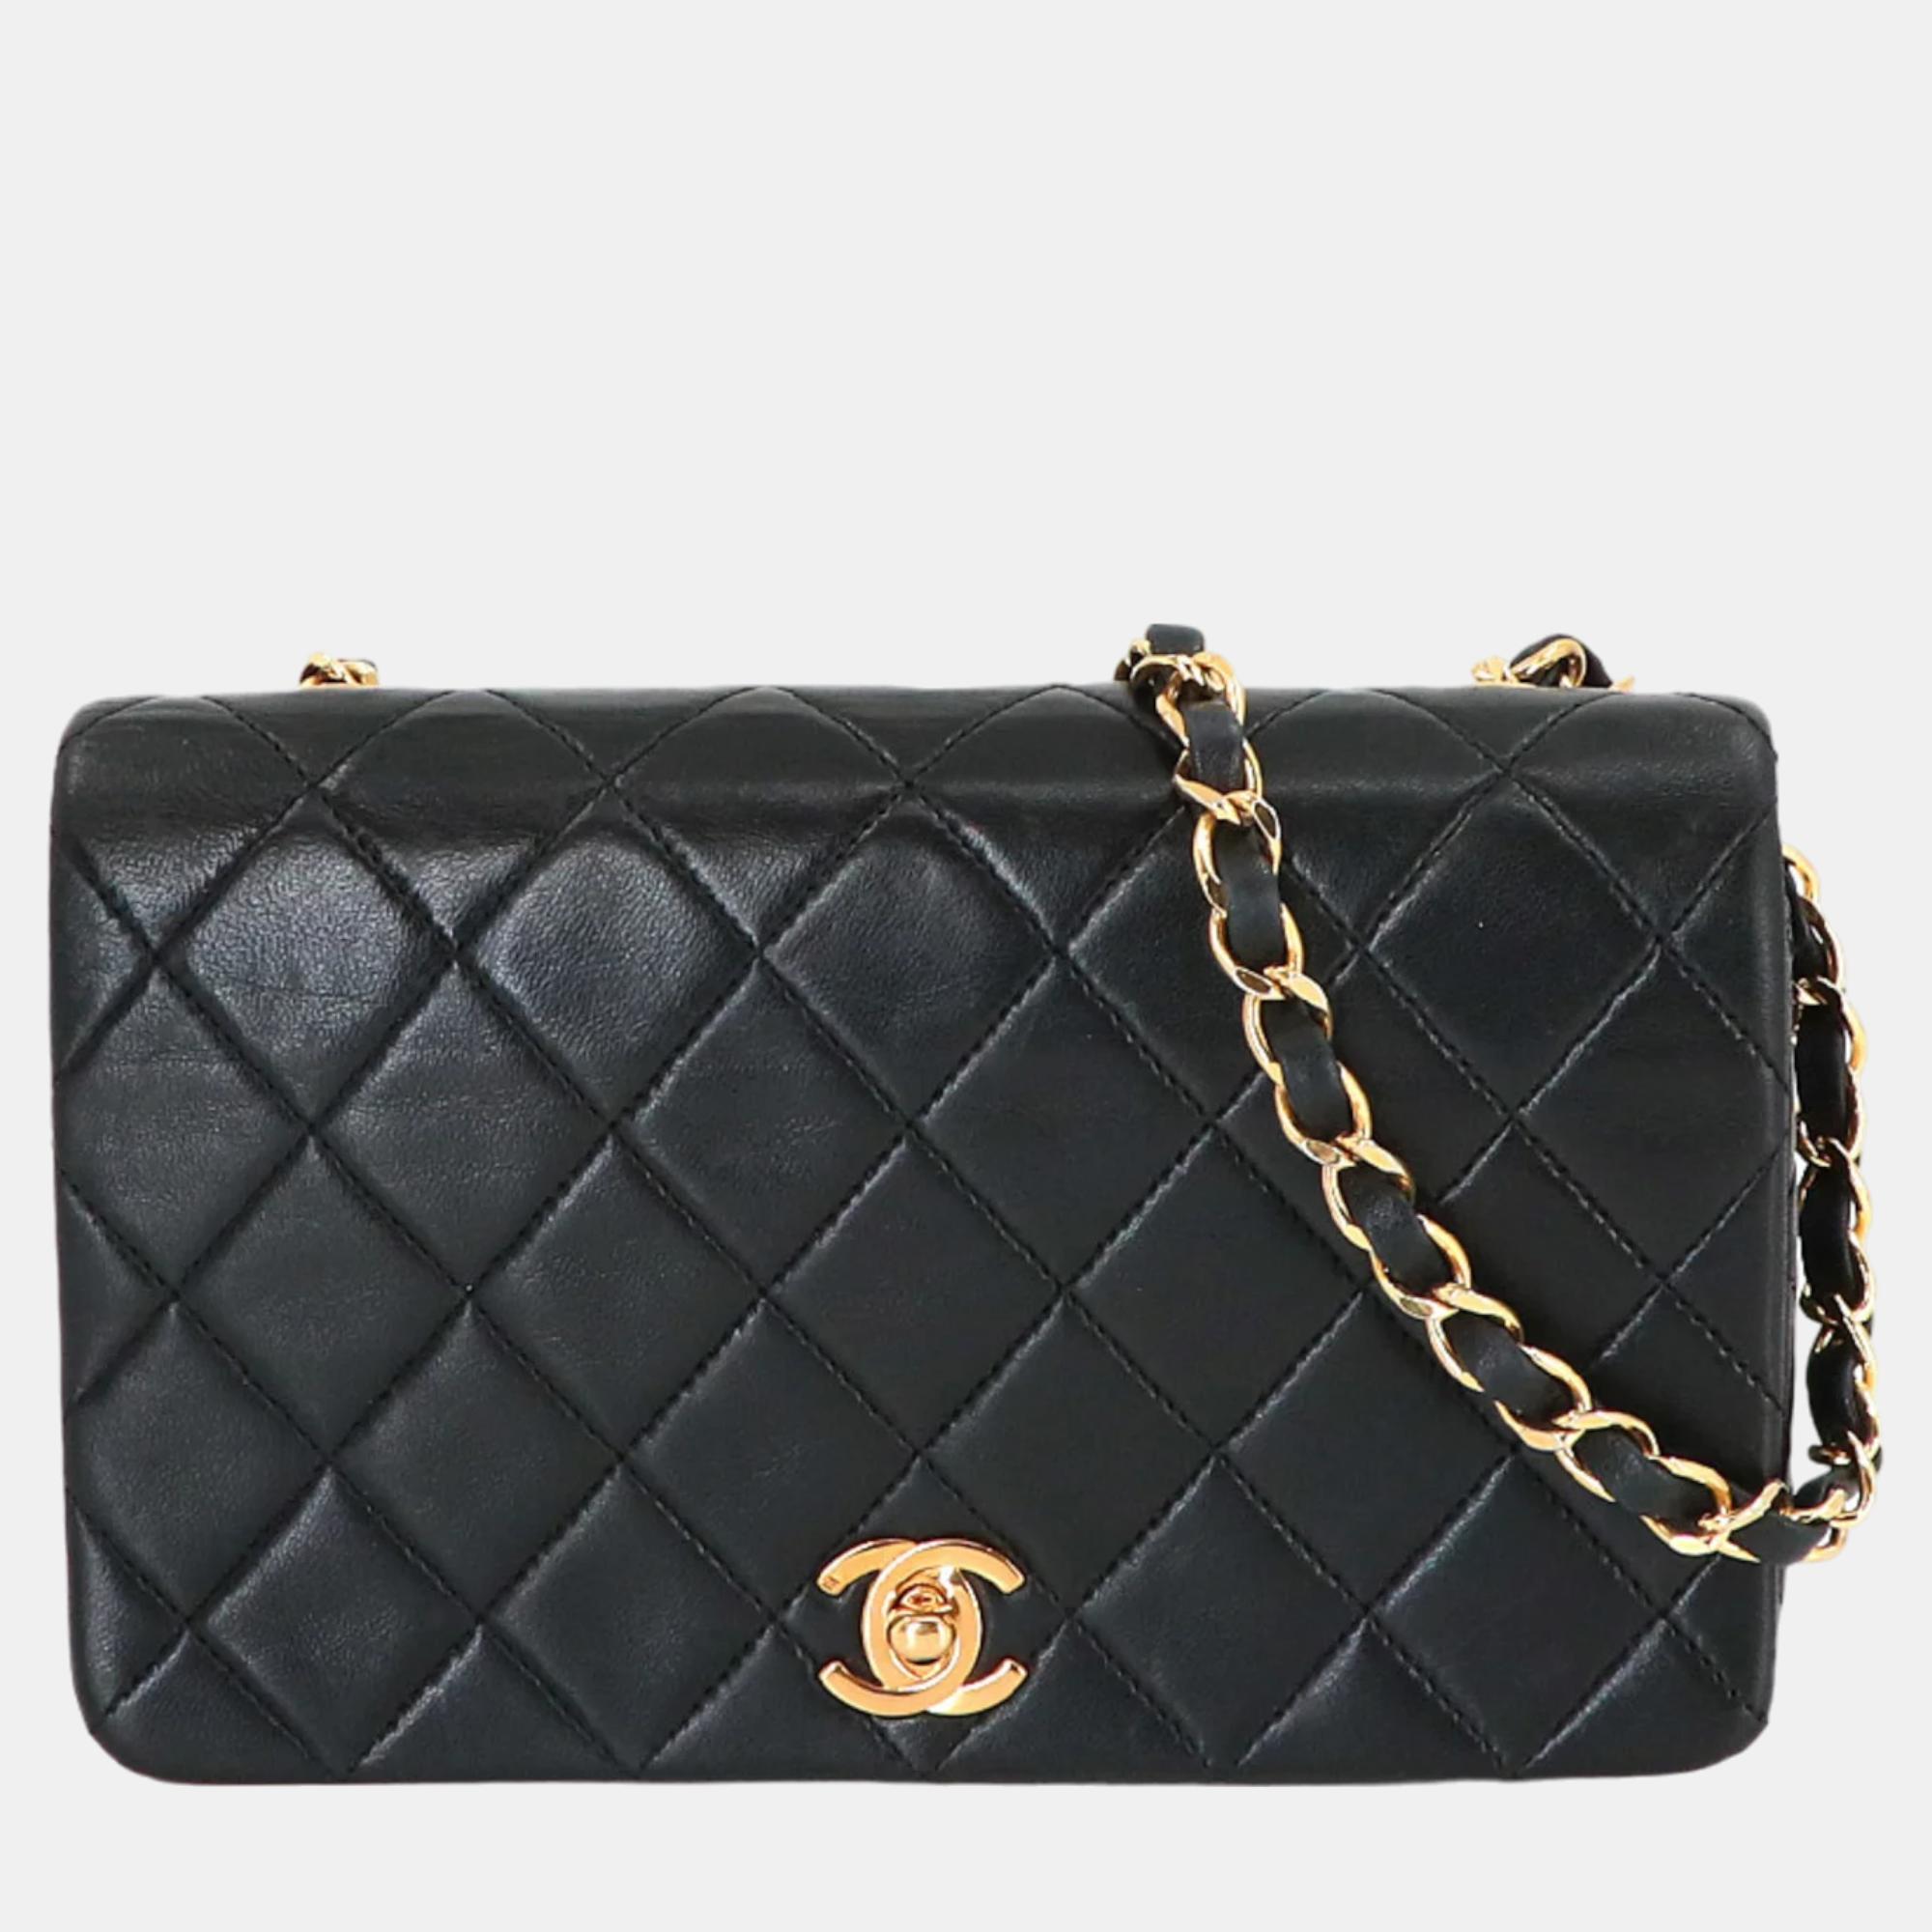 Chanel black quilted lambskin leather full single flap bag